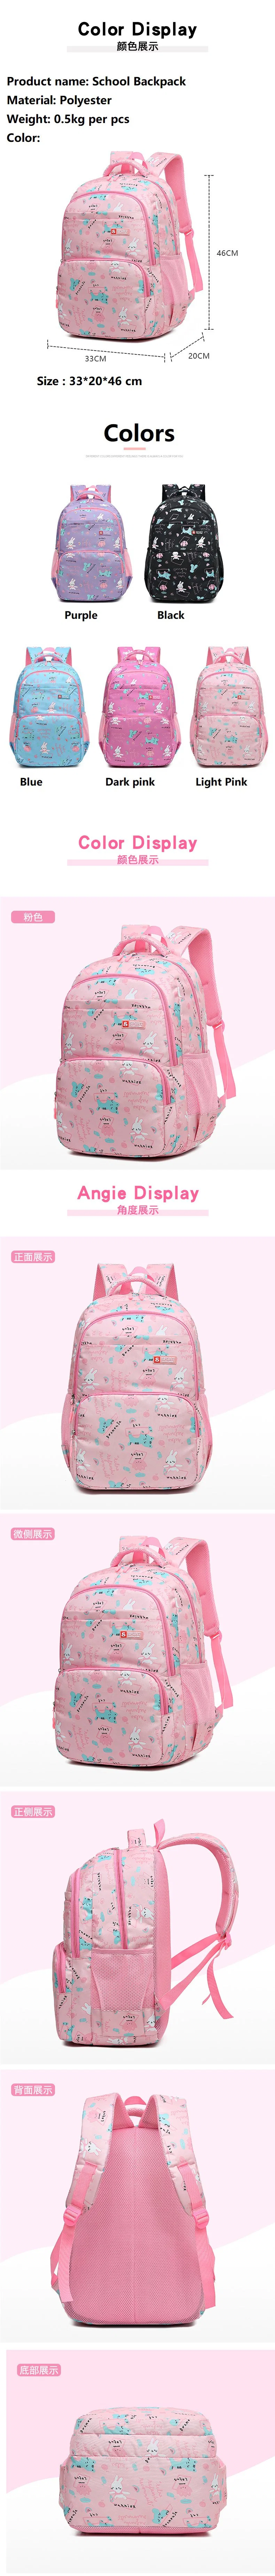 New Design Factory Outlet Mochila New Style Backpacks for Teenagers Backpack School Bags Girls School Bag with Pink Color